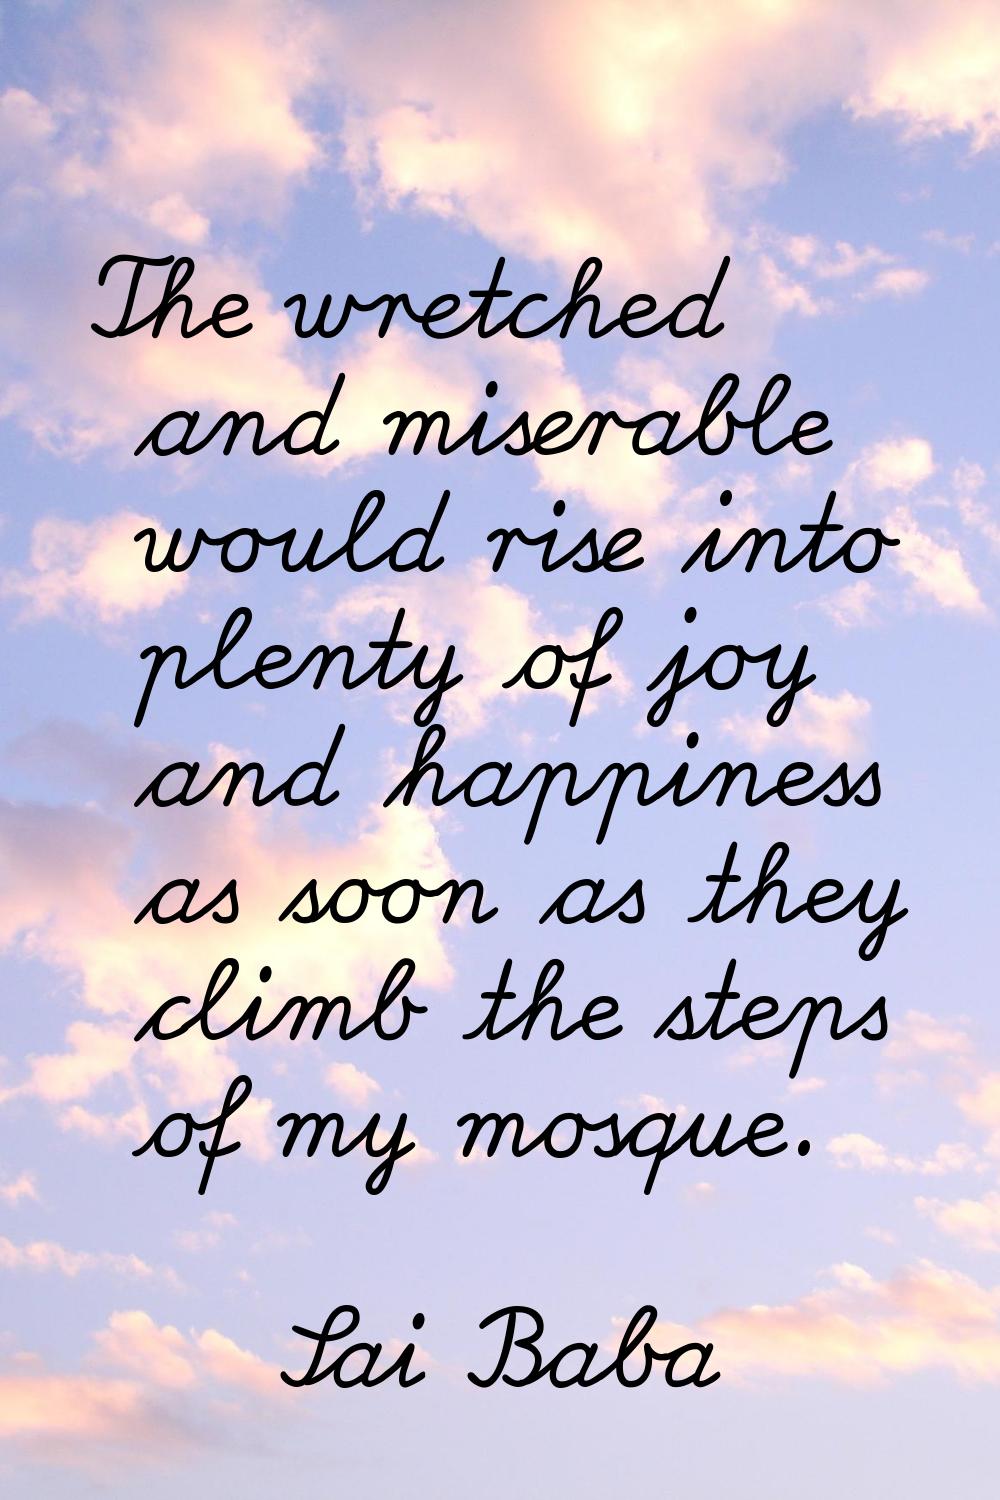 The wretched and miserable would rise into plenty of joy and happiness as soon as they climb the st